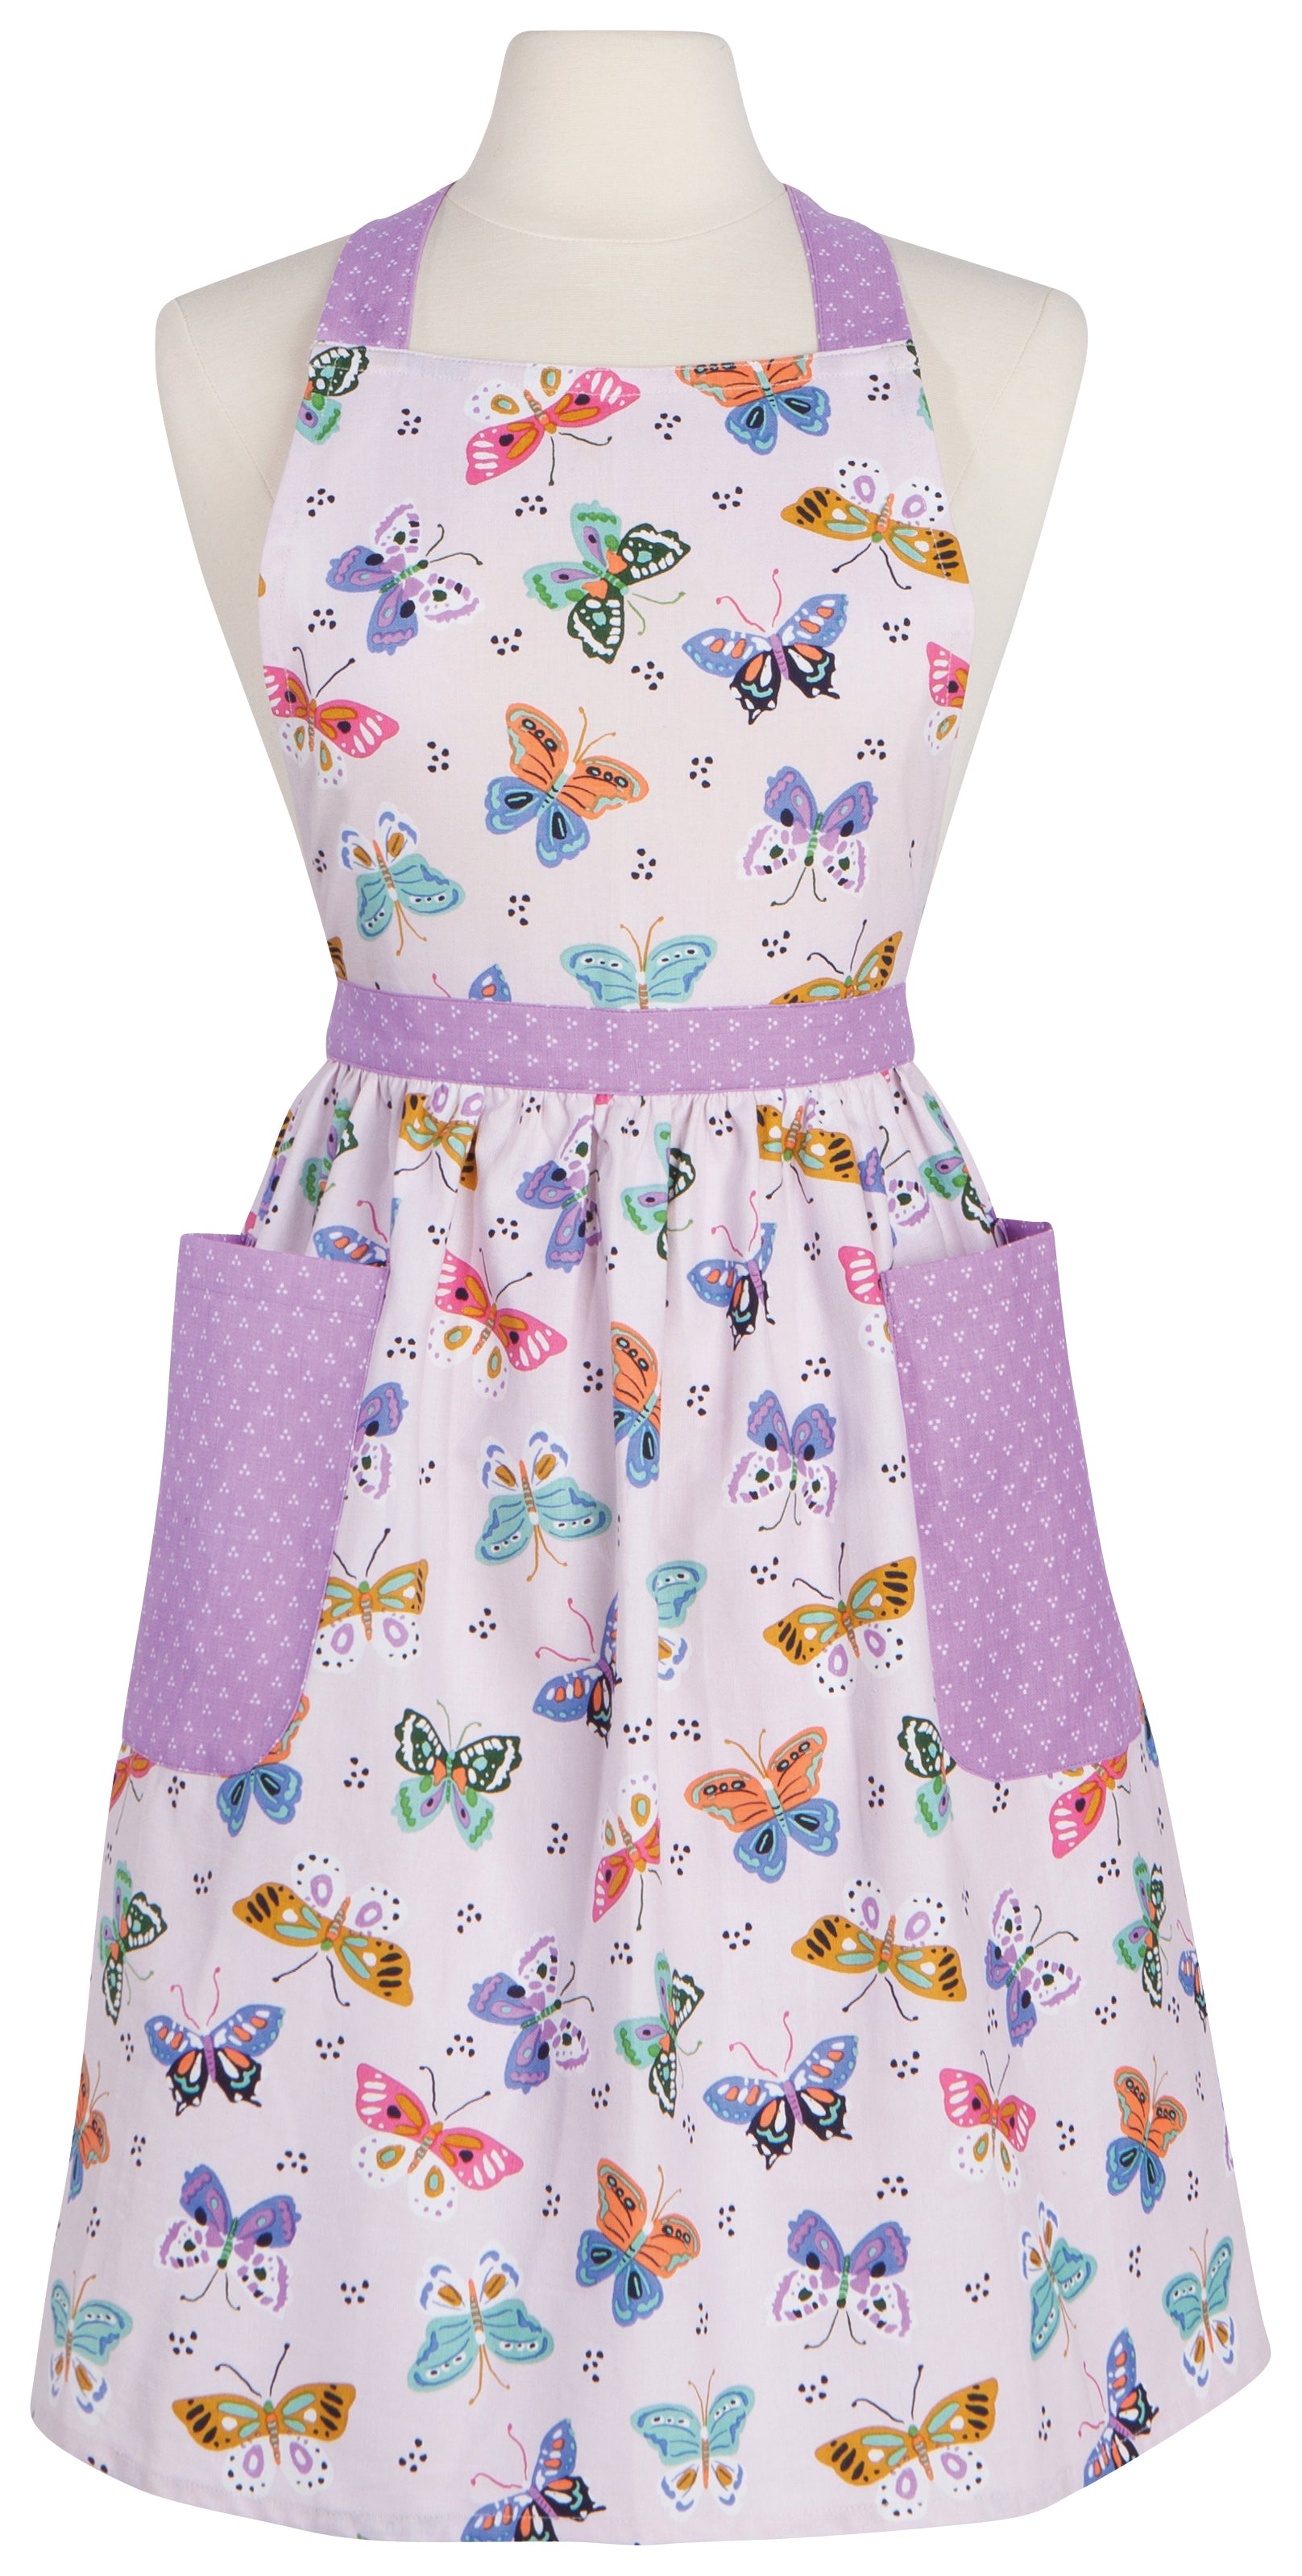 Flutter By Maisie Apron